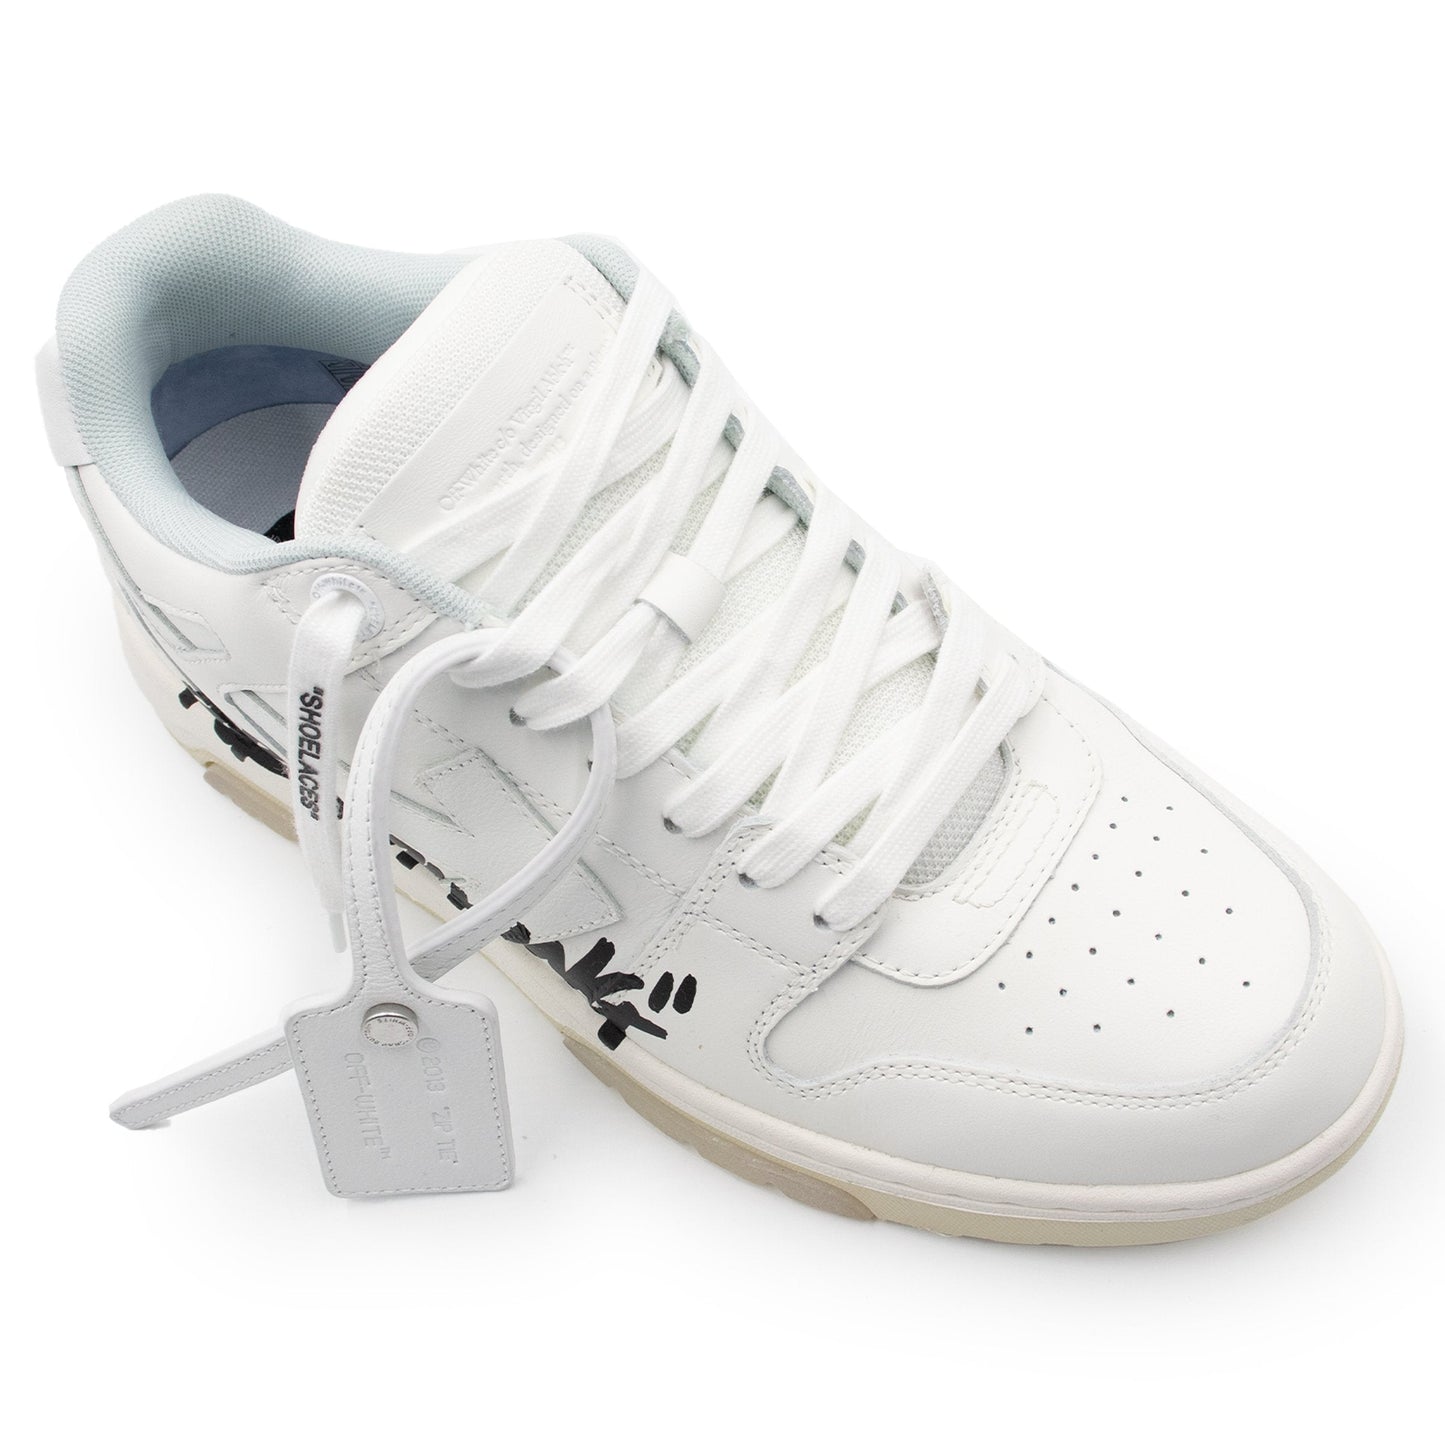 Out Of Office Sneakers "For Walking" in White & Black